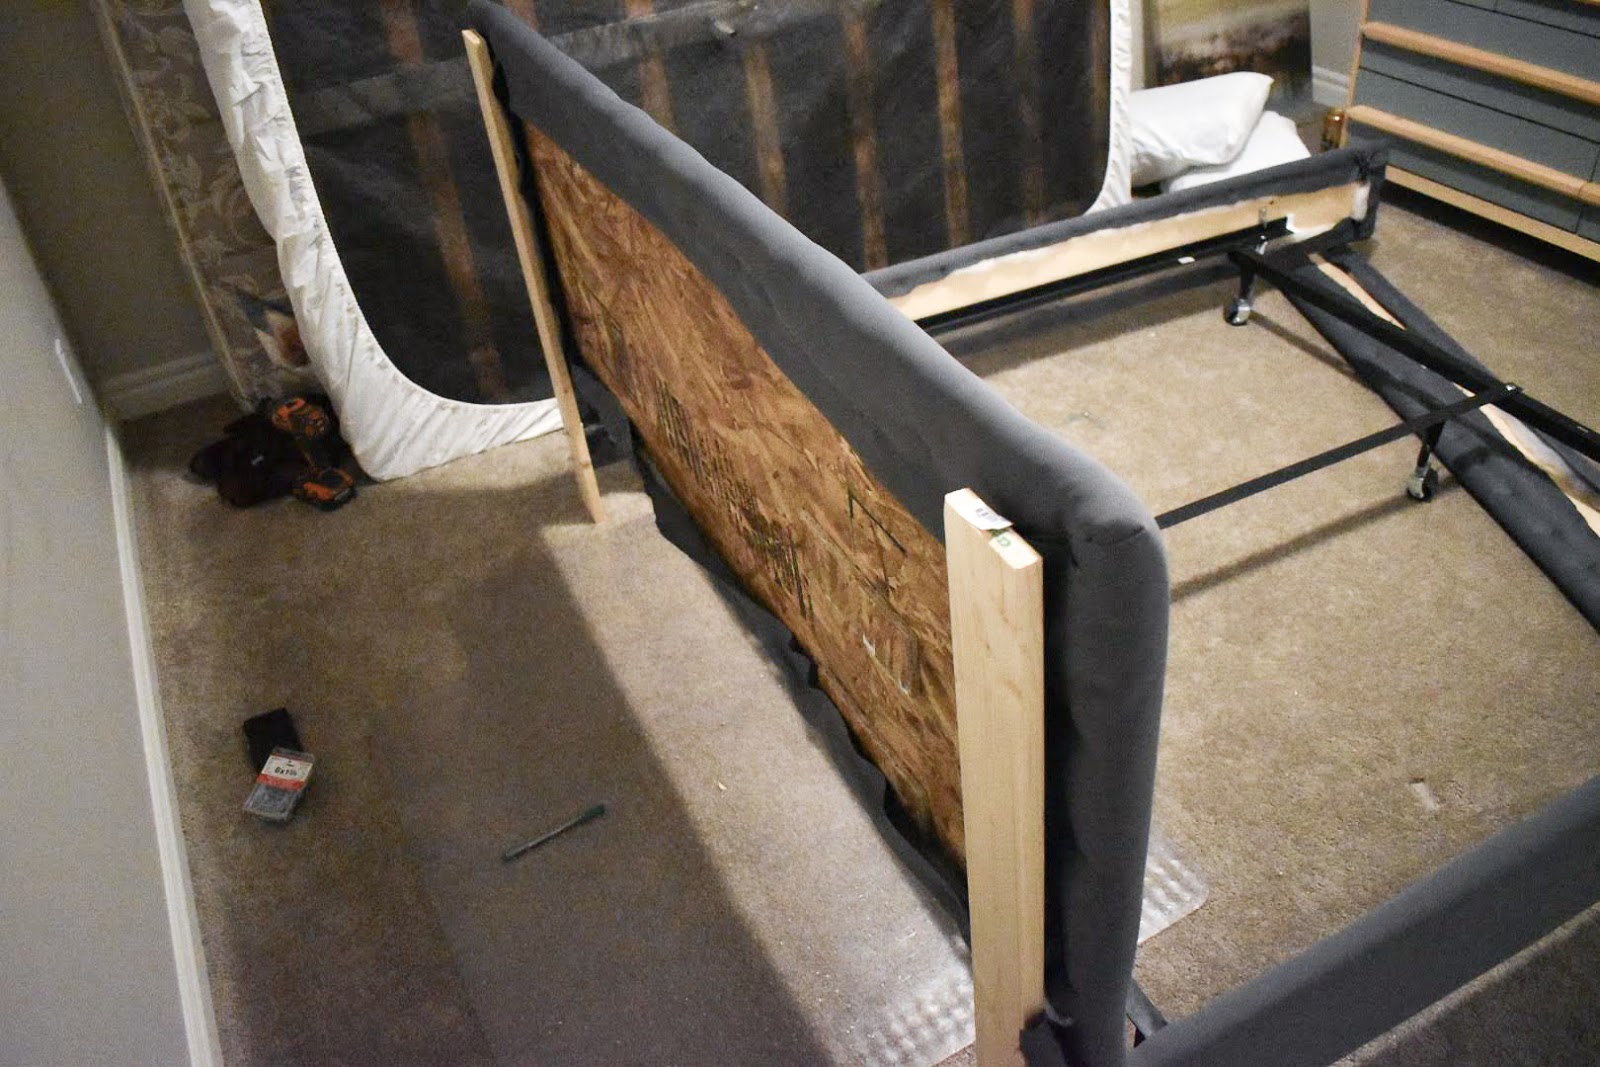 Metal Bed Frame Into An Upholstered, How To Attach Bed Frame To Headboard